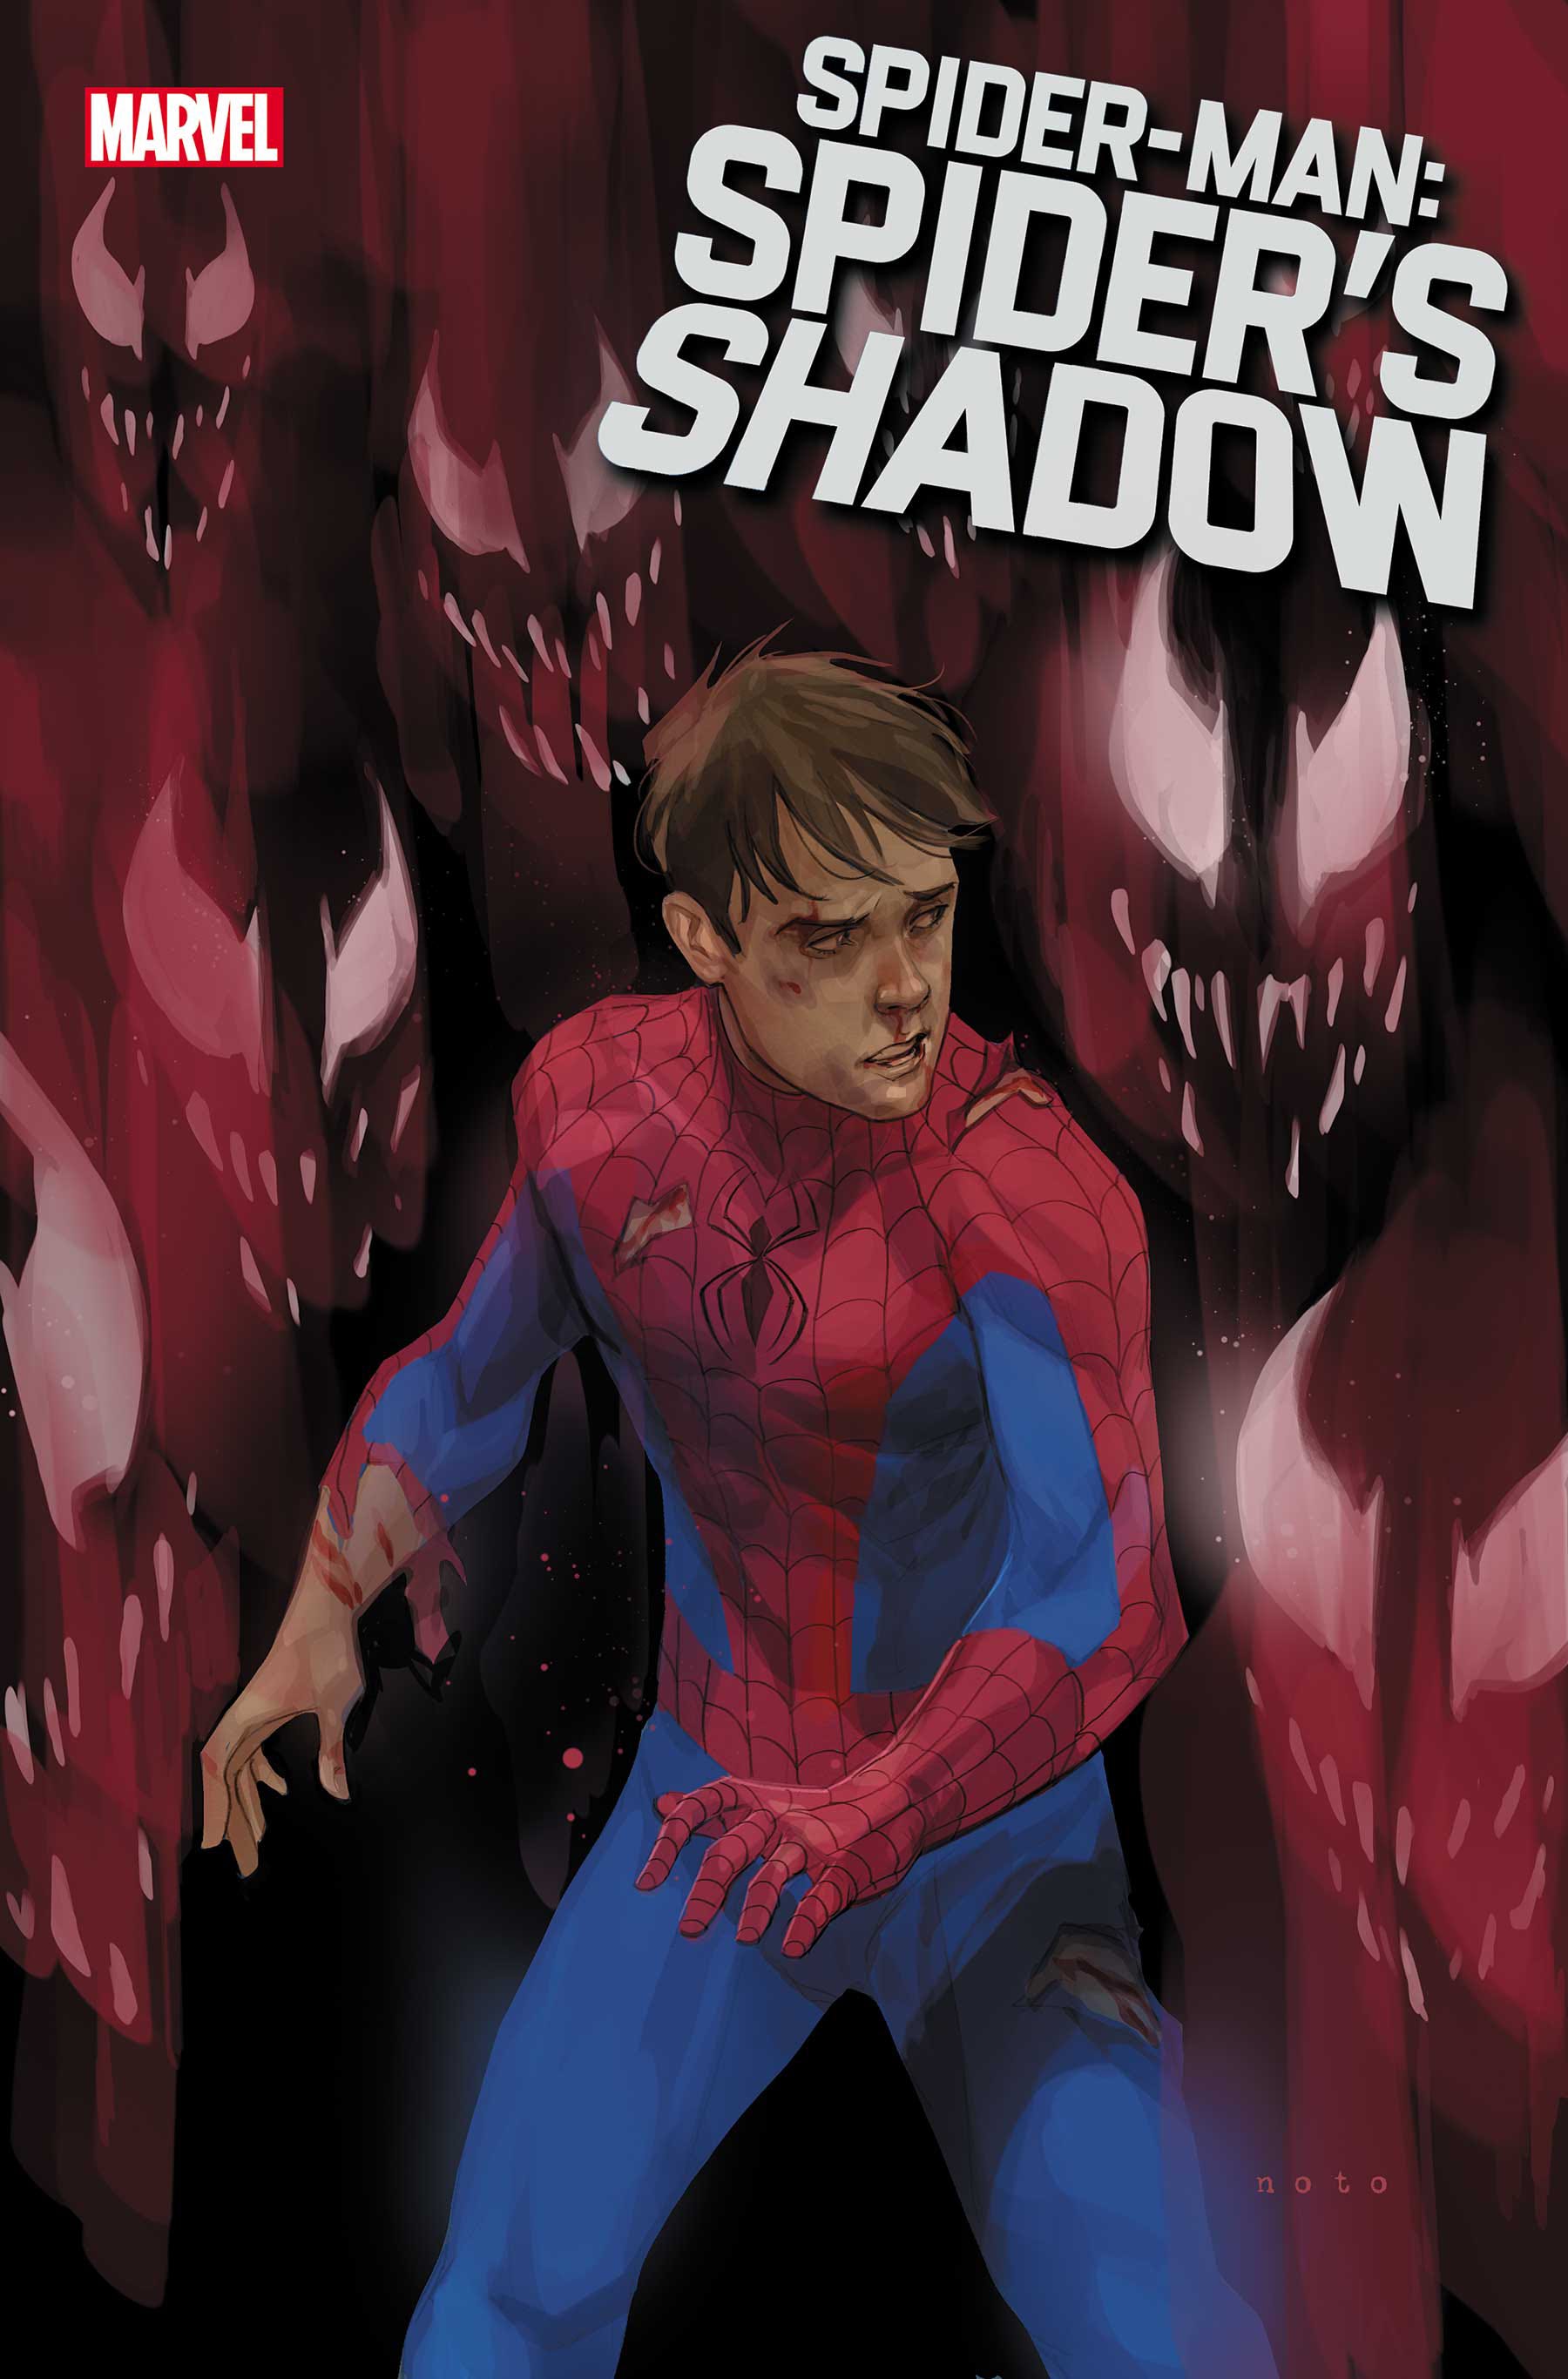 Spider-Man Spiders Shadow #5 (of 5)